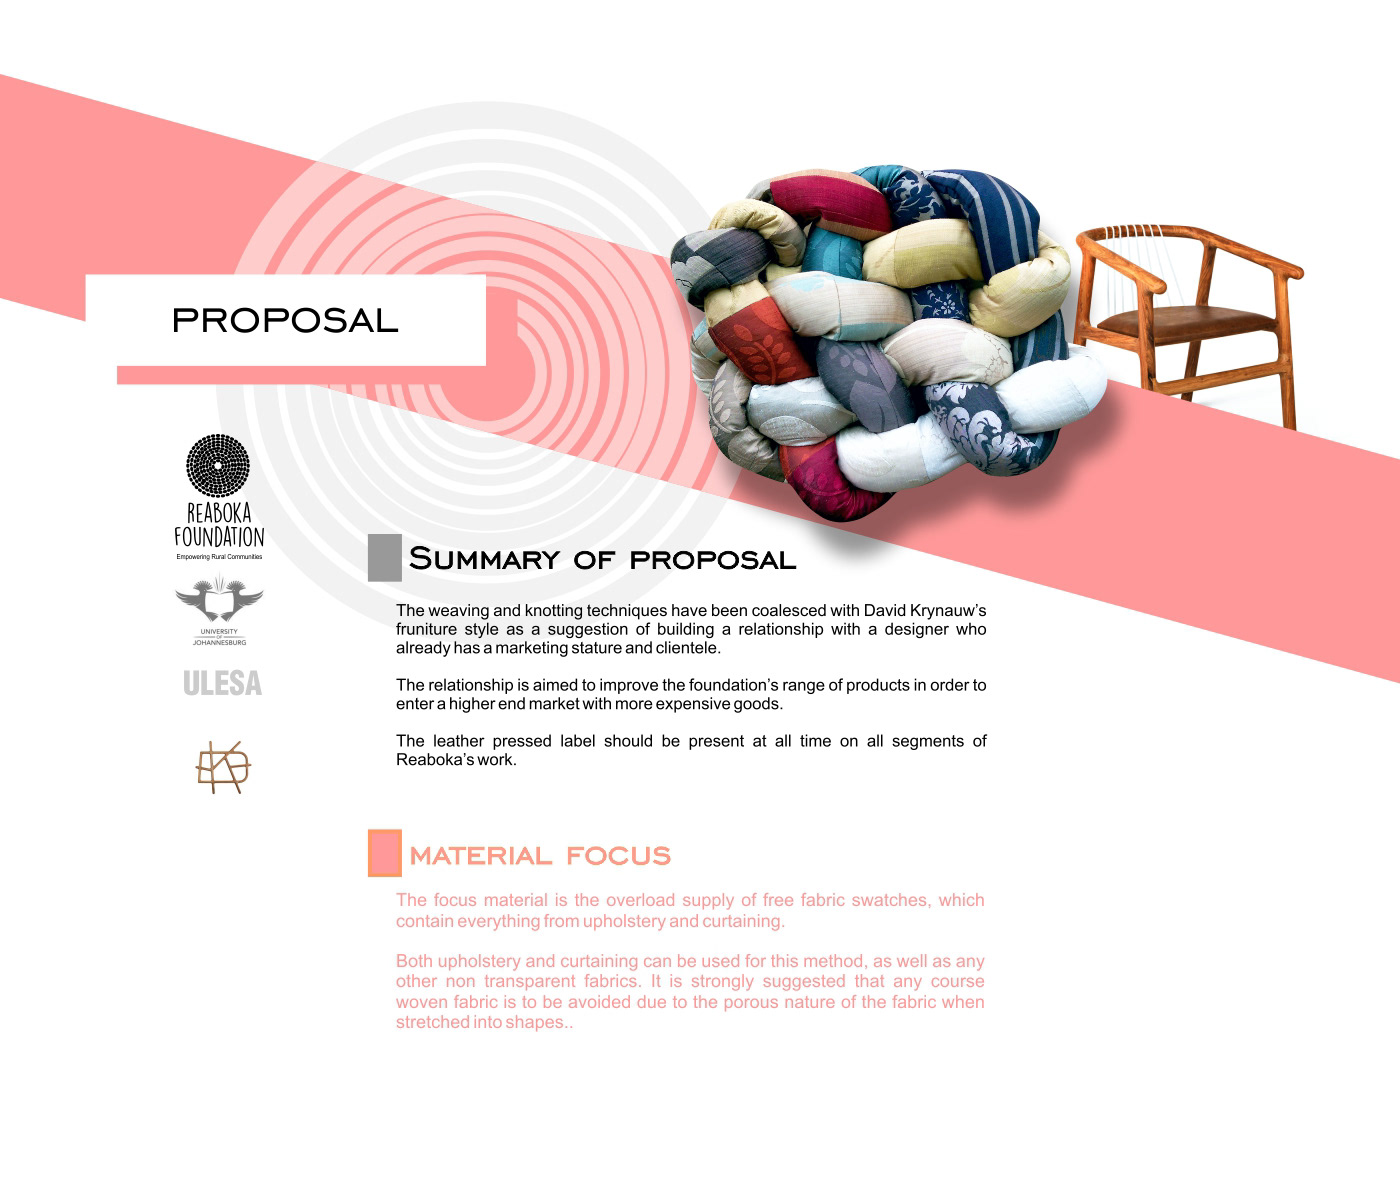 Community Engagement upholstery product design  industrial design  design south africa woodwork pillow Sustainability upcycling